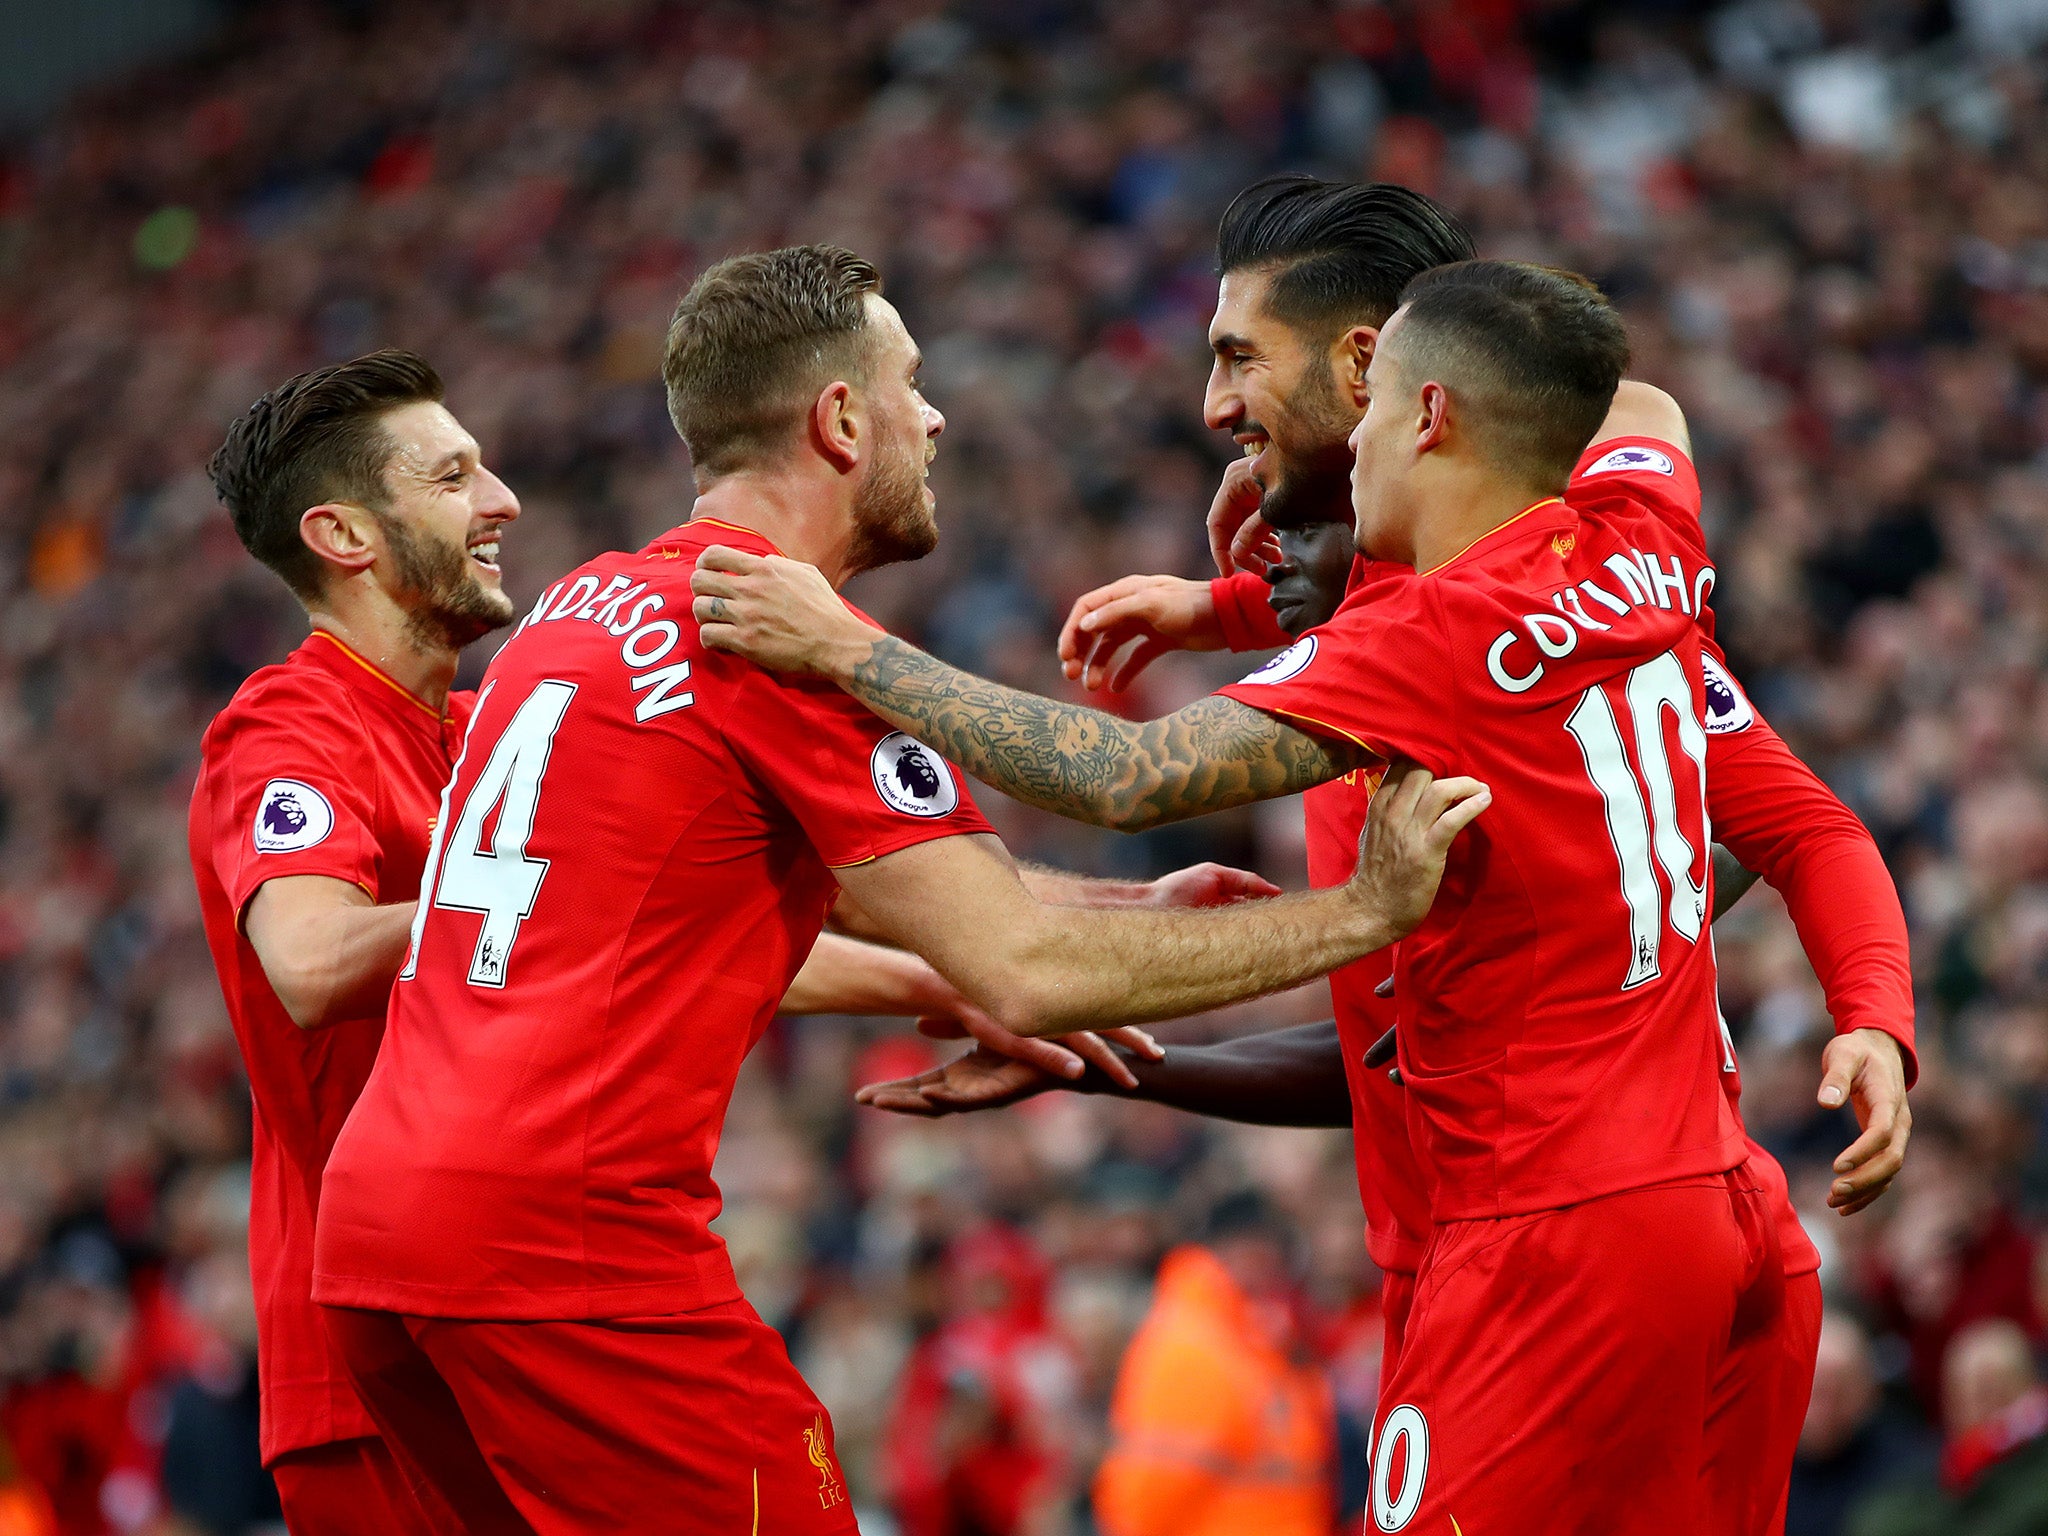 The Reds were in irresistible form once again